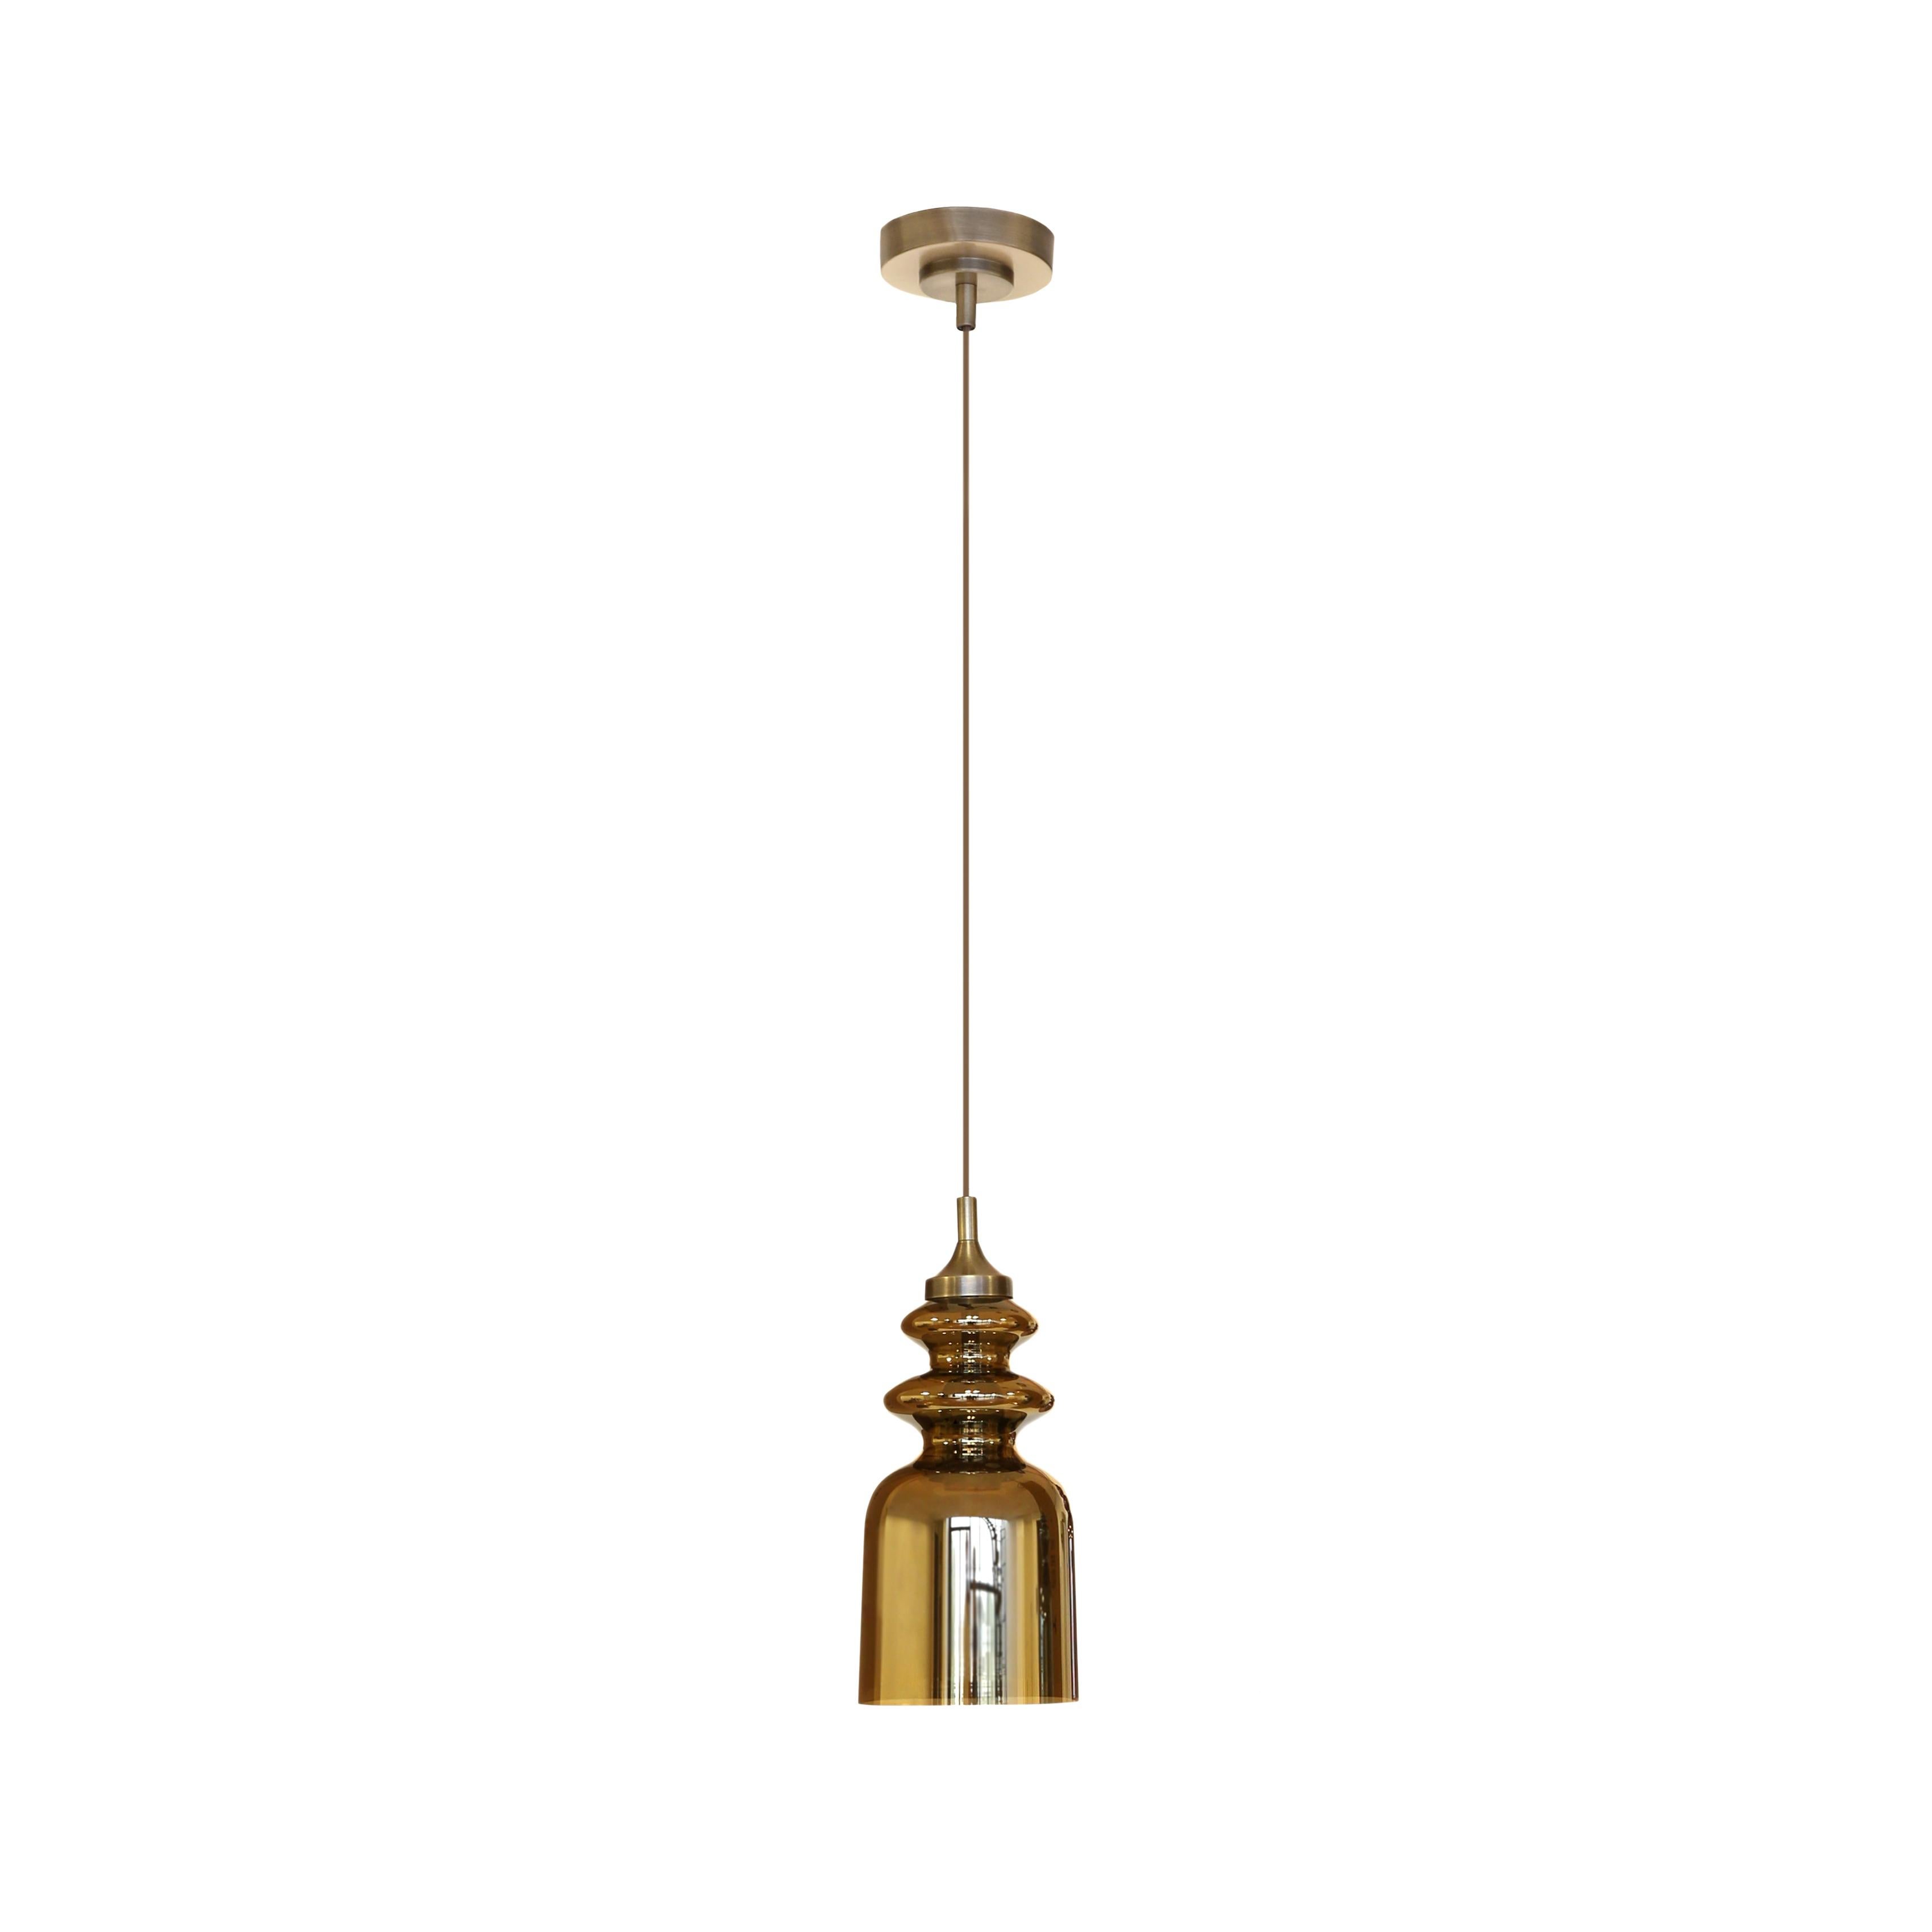 Messalina Suspension Light with Satin Bronze Structure and Dark Amber Metallized For Sale